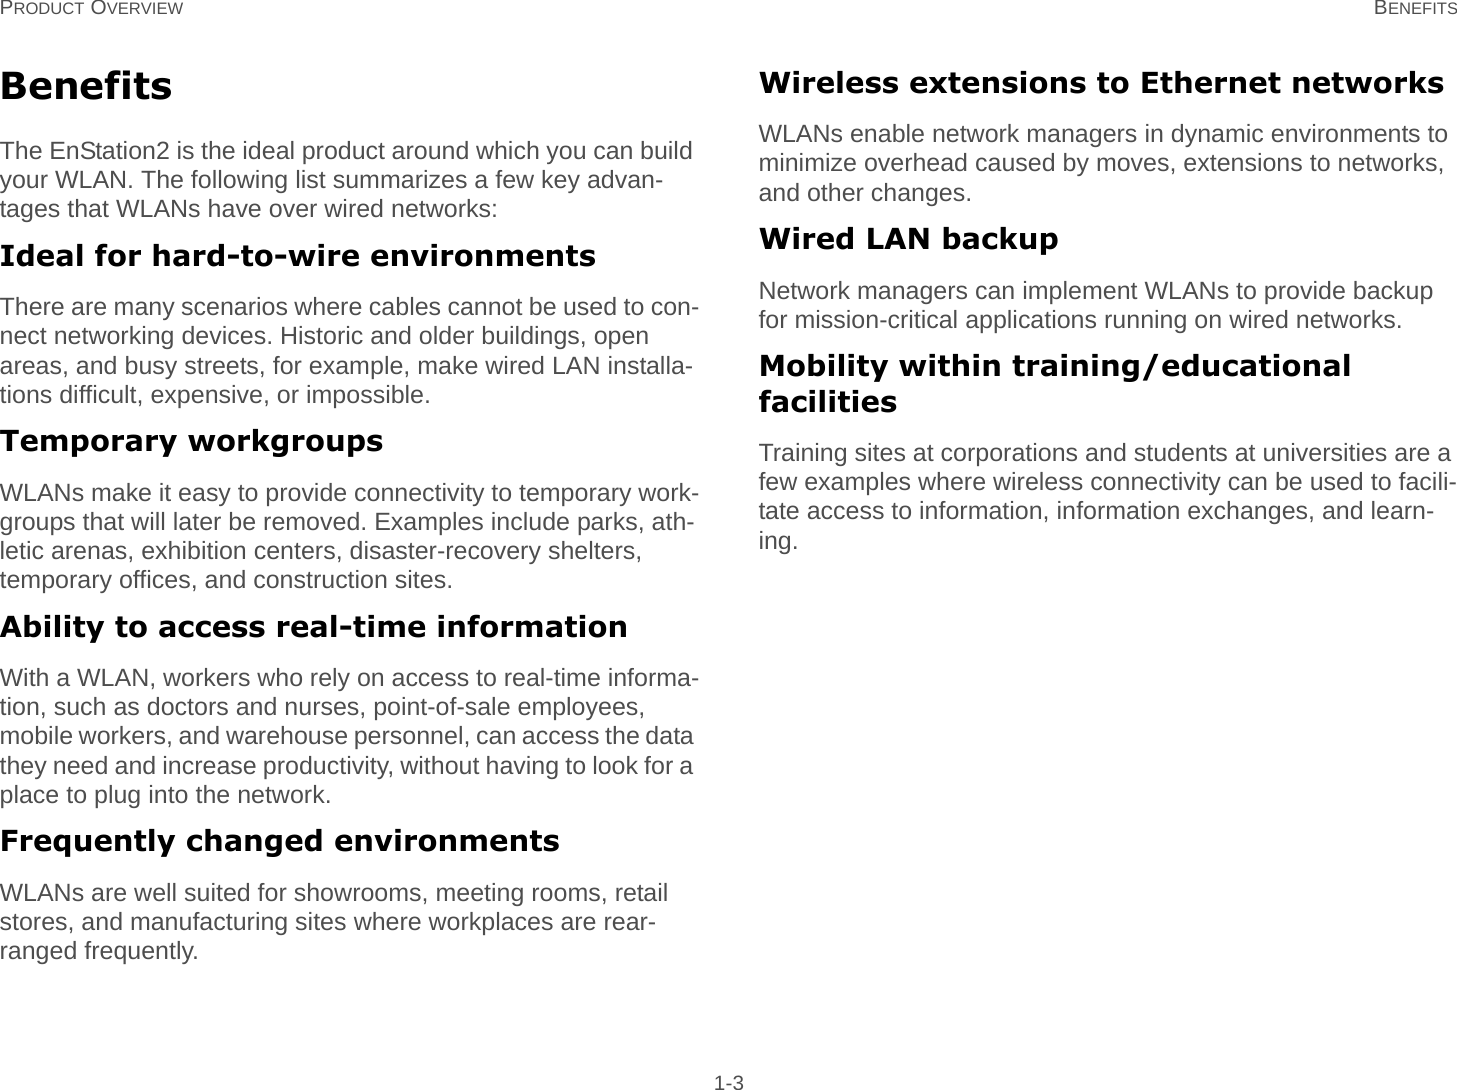 PRODUCT OVERVIEW BENEFITS 1-3BenefitsThe EnStation2 is the ideal product around which you can build your WLAN. The following list summarizes a few key advan-tages that WLANs have over wired networks:Ideal for hard-to-wire environmentsThere are many scenarios where cables cannot be used to con-nect networking devices. Historic and older buildings, open areas, and busy streets, for example, make wired LAN installa-tions difficult, expensive, or impossible.Temporary workgroupsWLANs make it easy to provide connectivity to temporary work-groups that will later be removed. Examples include parks, ath-letic arenas, exhibition centers, disaster-recovery shelters, temporary offices, and construction sites.Ability to access real-time informationWith a WLAN, workers who rely on access to real-time informa-tion, such as doctors and nurses, point-of-sale employees, mobile workers, and warehouse personnel, can access the data they need and increase productivity, without having to look for a place to plug into the network.Frequently changed environmentsWLANs are well suited for showrooms, meeting rooms, retail stores, and manufacturing sites where workplaces are rear-ranged frequently.Wireless extensions to Ethernet networksWLANs enable network managers in dynamic environments to minimize overhead caused by moves, extensions to networks, and other changes.Wired LAN backupNetwork managers can implement WLANs to provide backup for mission-critical applications running on wired networks.Mobility within training/educational facilitiesTraining sites at corporations and students at universities are a few examples where wireless connectivity can be used to facili-tate access to information, information exchanges, and learn-ing.